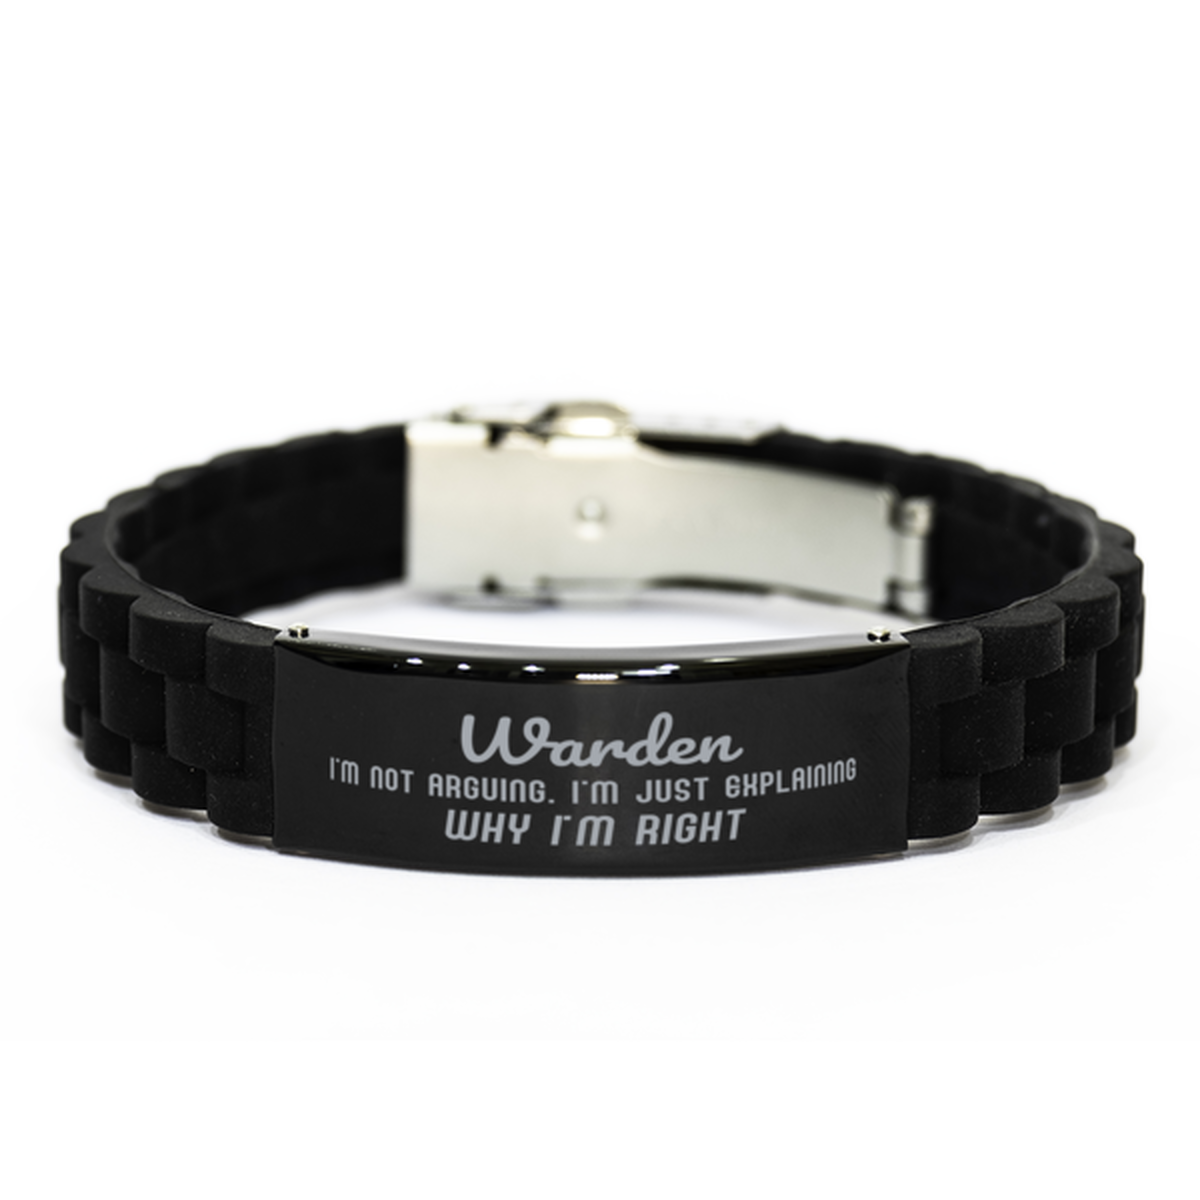 Warden I'm not Arguing. I'm Just Explaining Why I'm RIGHT Black Glidelock Clasp Bracelet, Funny Saying Quote Warden Gifts For Warden Graduation Birthday Christmas Gifts for Men Women Coworker